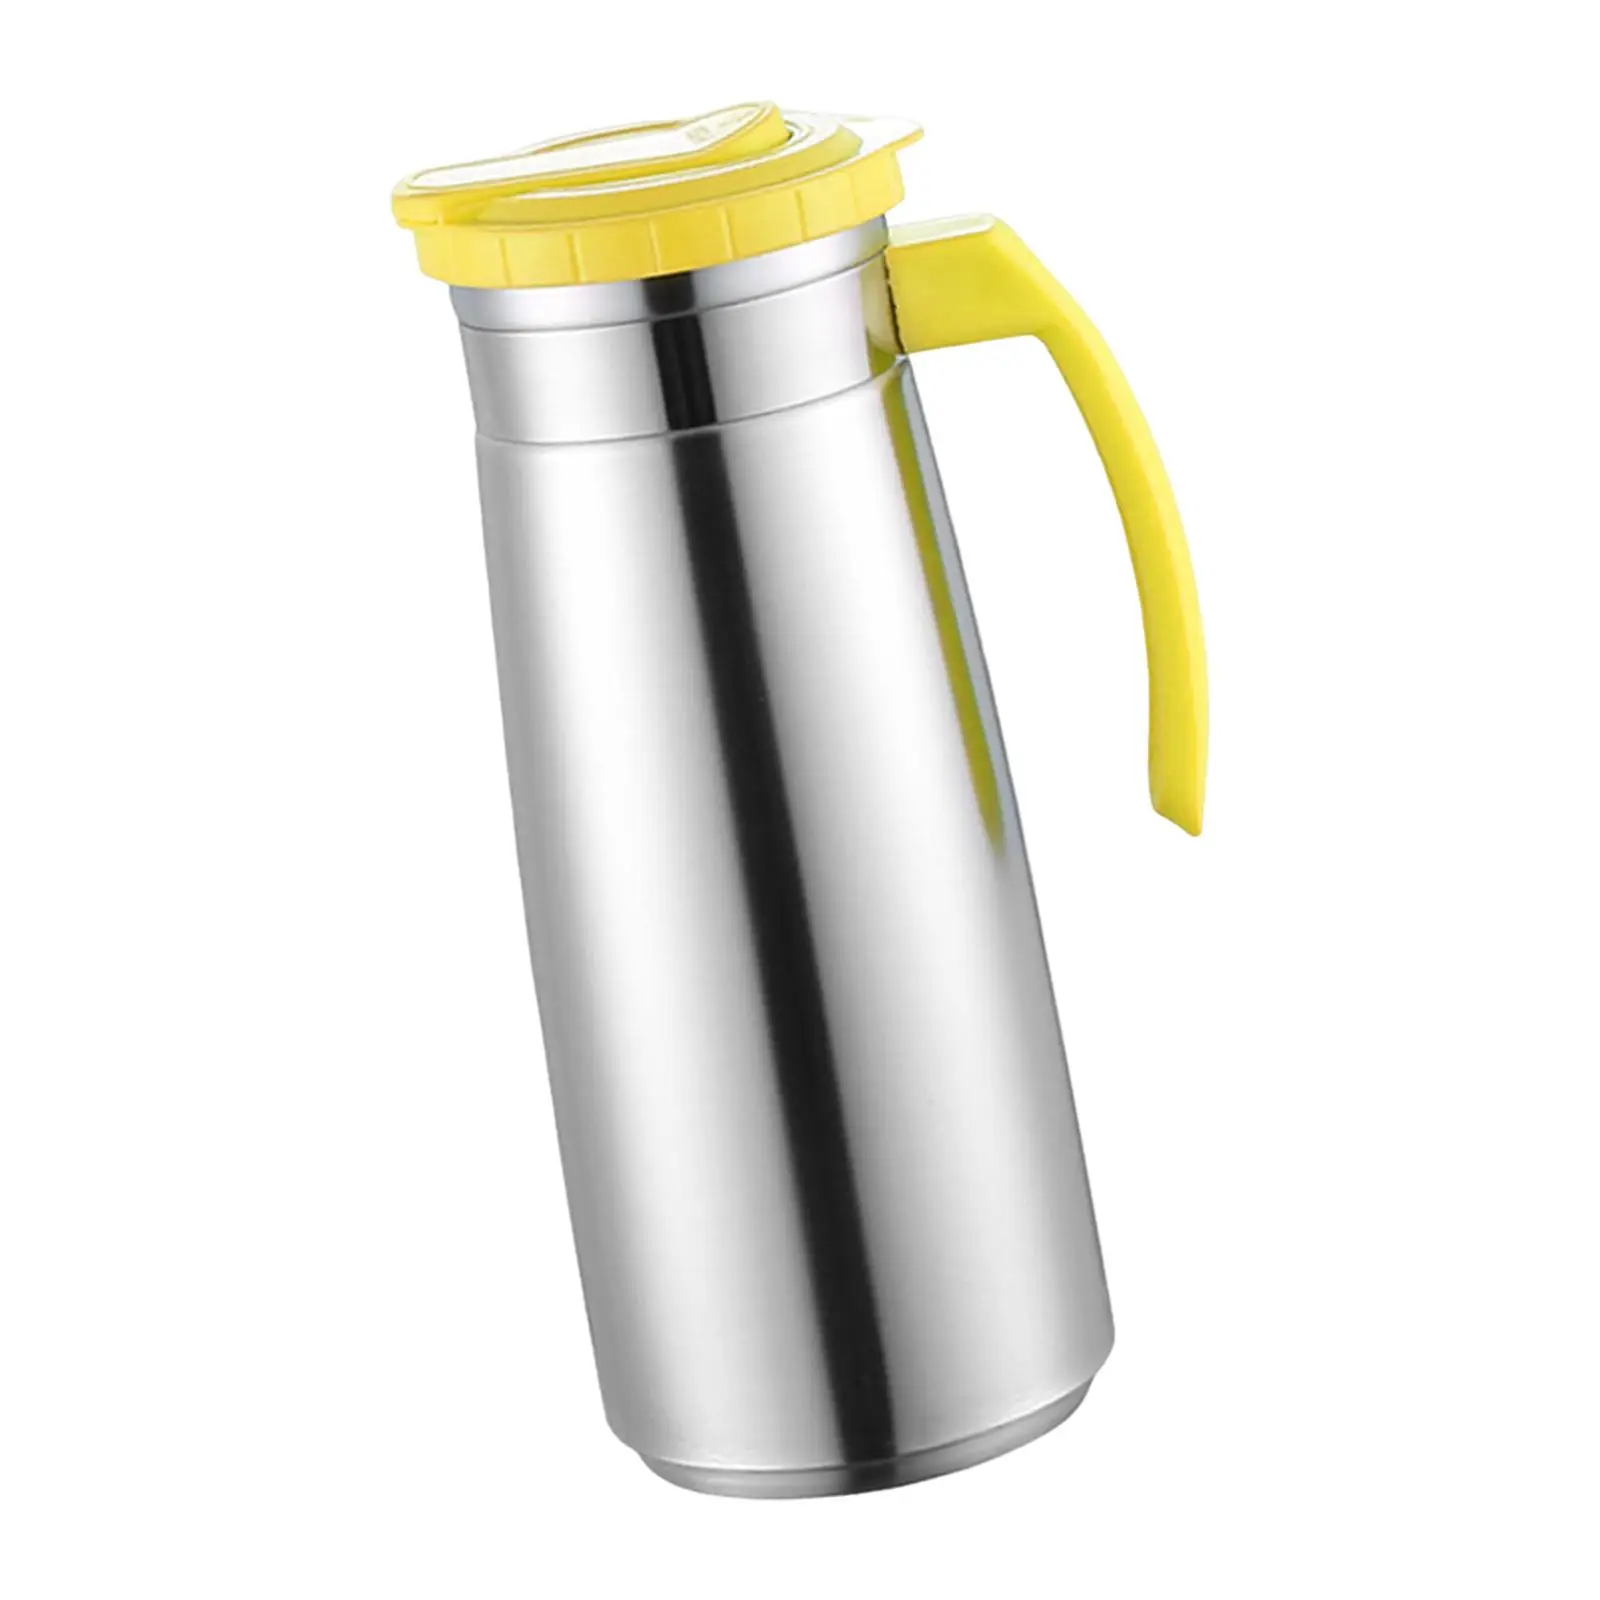 Stainless Steel Jug Tea Kettle High Temperature Resistant Water Pitcher for Party Kitchen Refrigerator Household Picnic